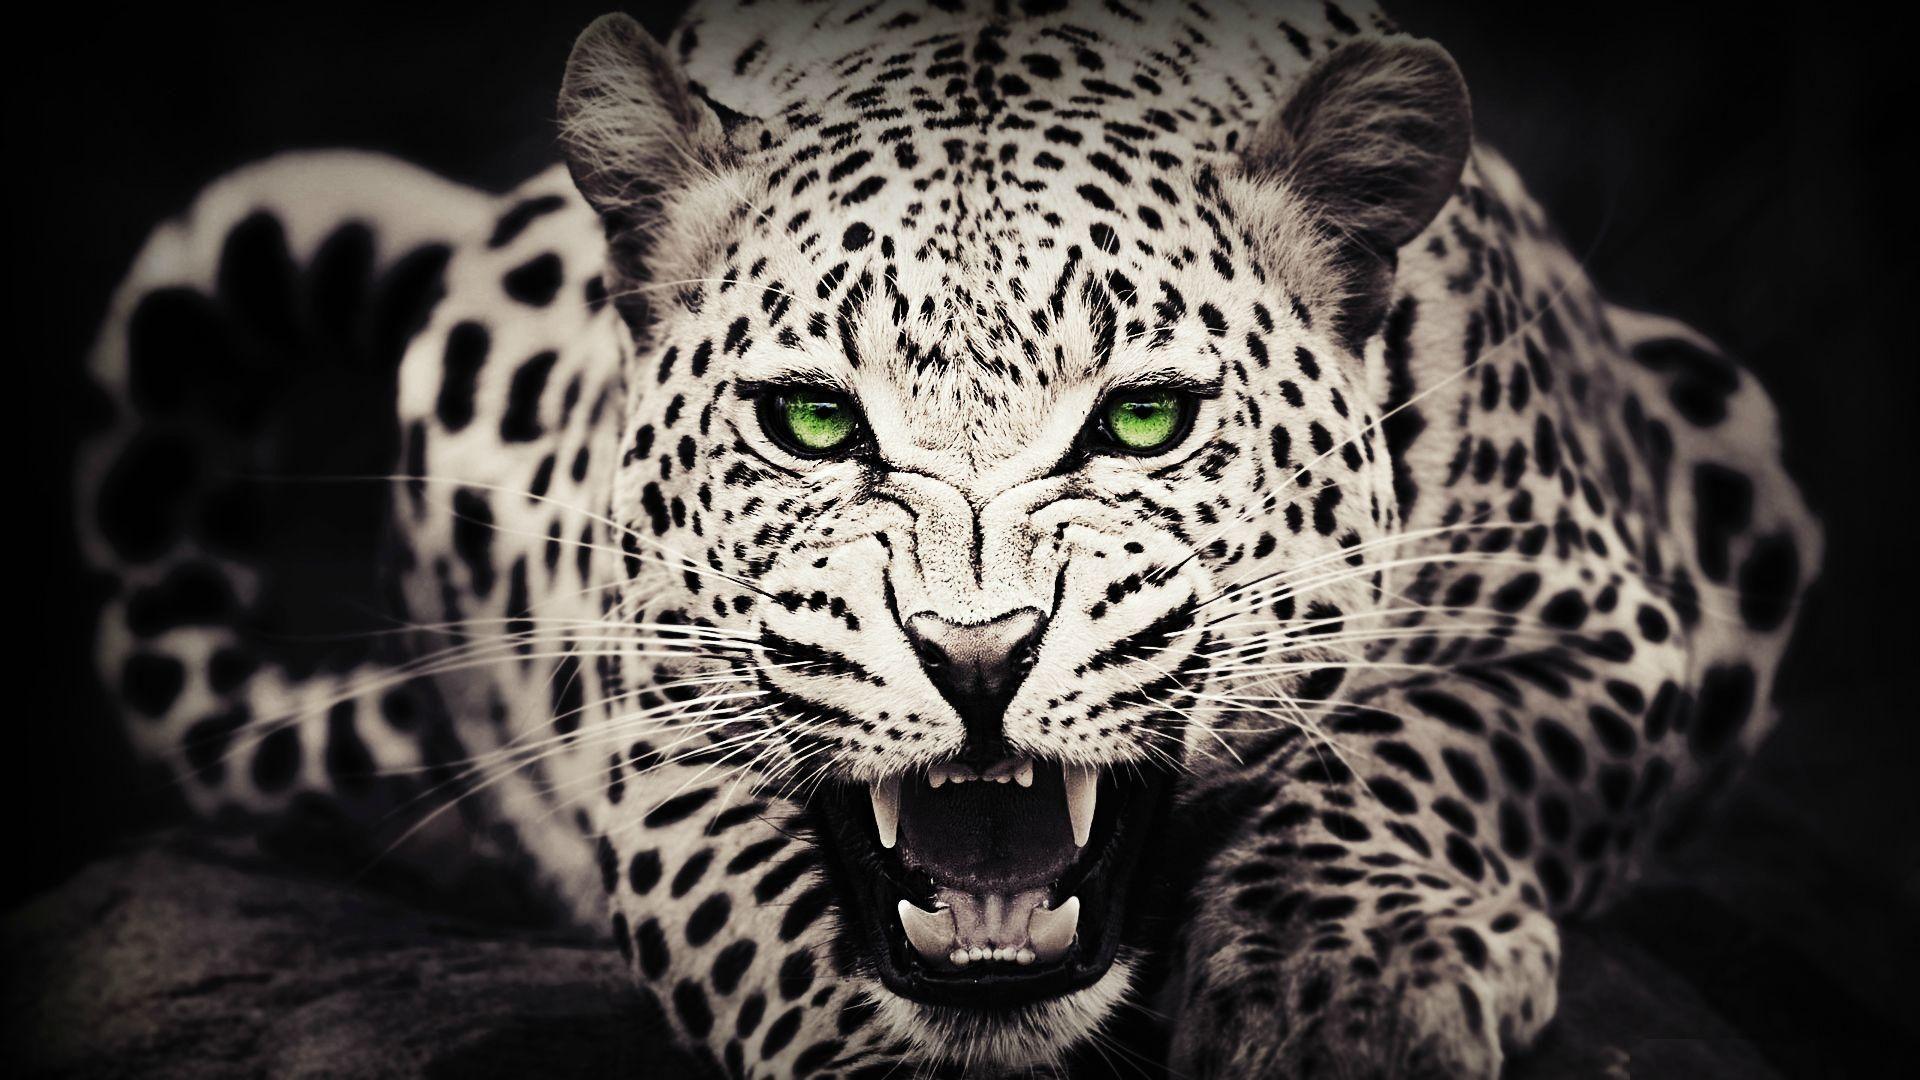 Ultra Hd Animal Wallpapers - Top Free Ultra Hd Animal Backgrounds